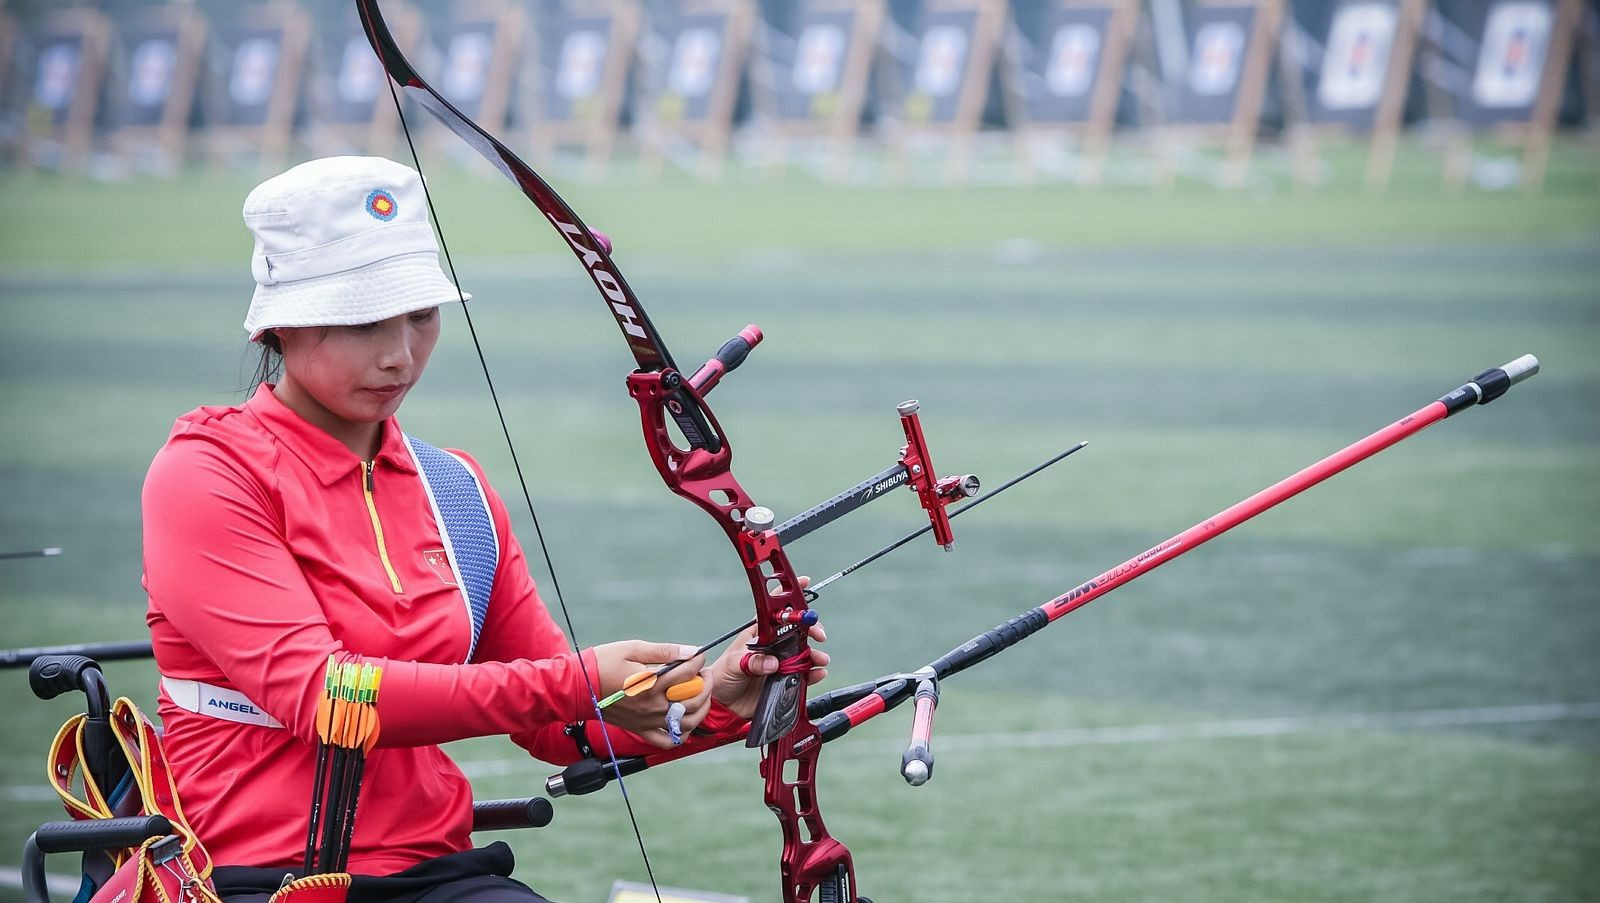 Defending champion Wu forced to settle for bronze at World Archery Para Championships